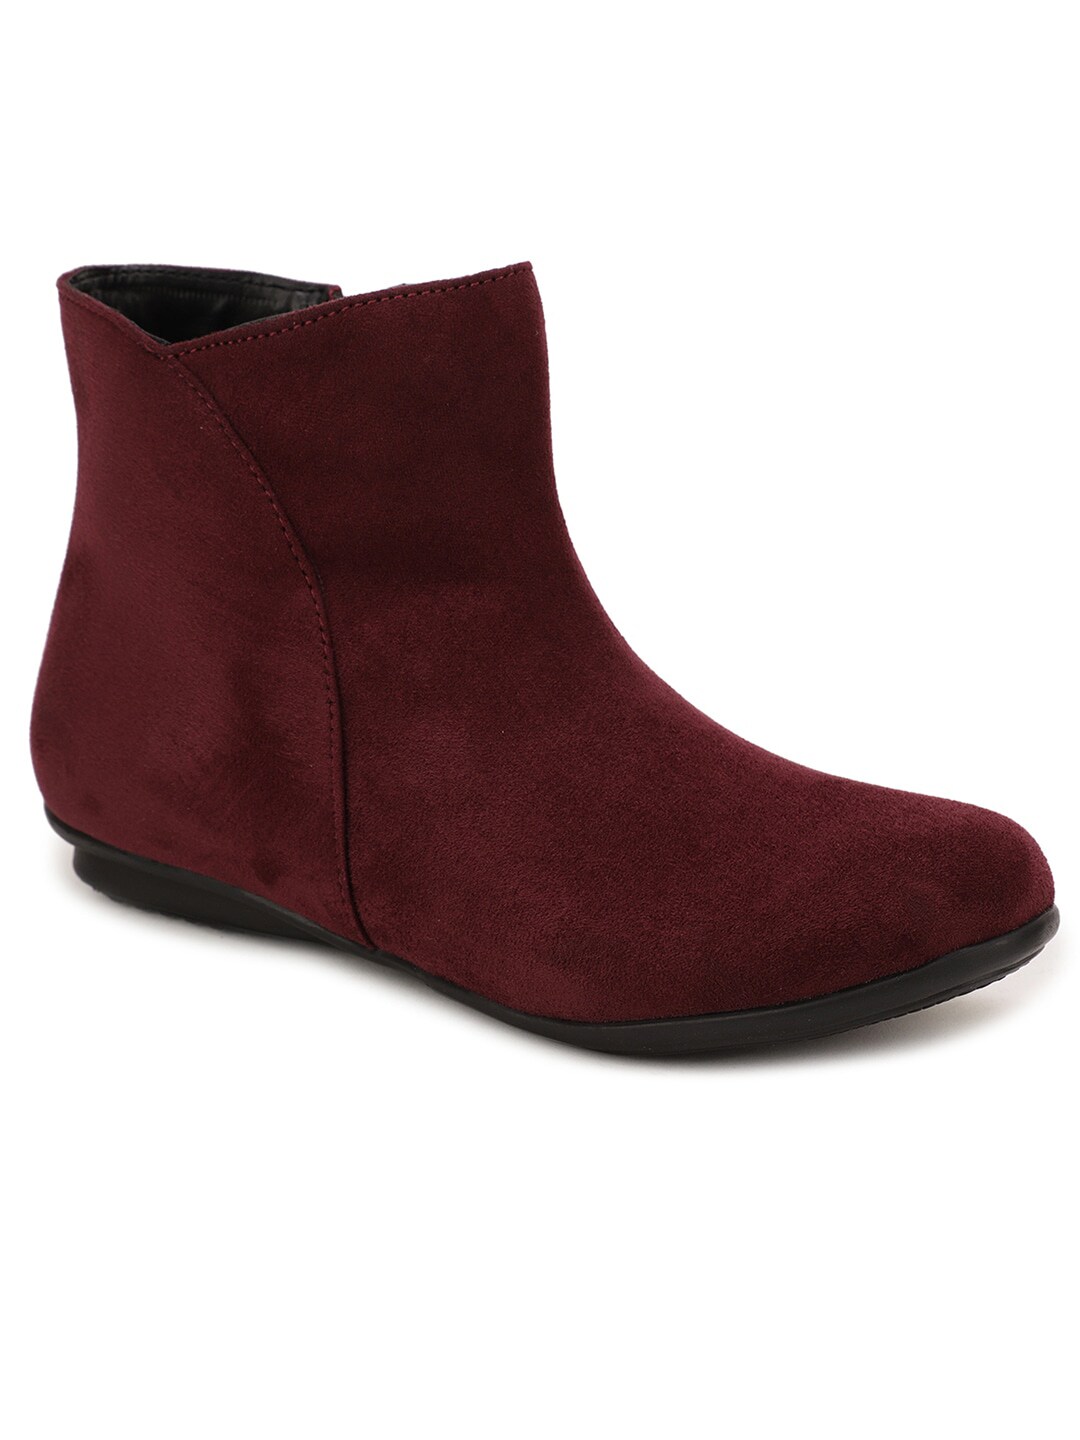 Bruno Manetti Women Maroon Suede Flat Boots Price in India